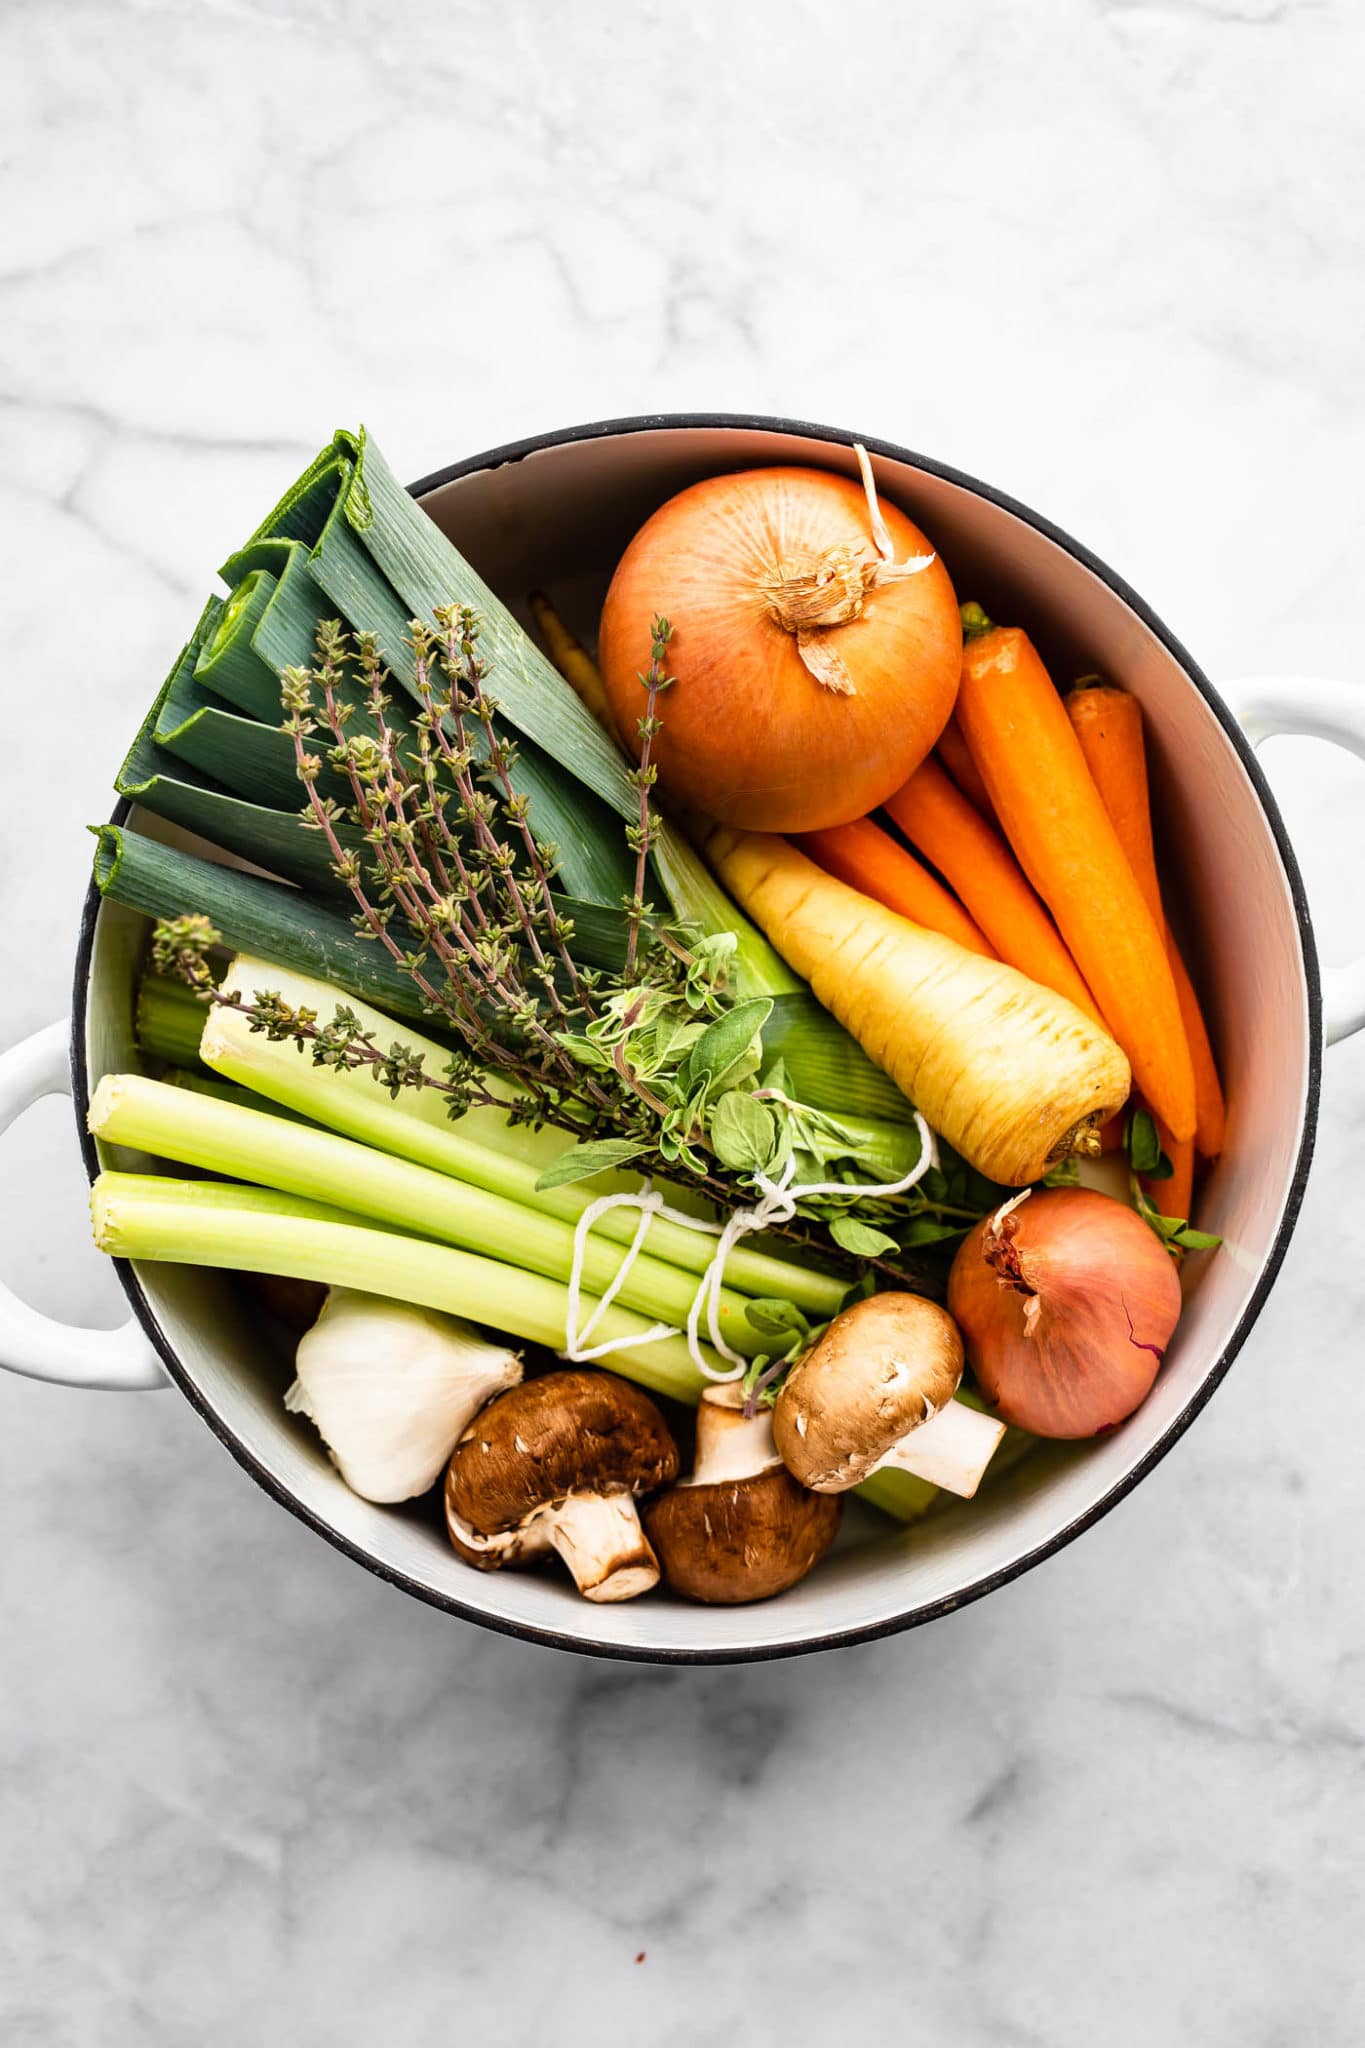 a pan full of vegetables including an onion, shallot, carrots, a parsnip, celery, leaks, mushrooms, and fresh herbs showing how to make vegetable broth